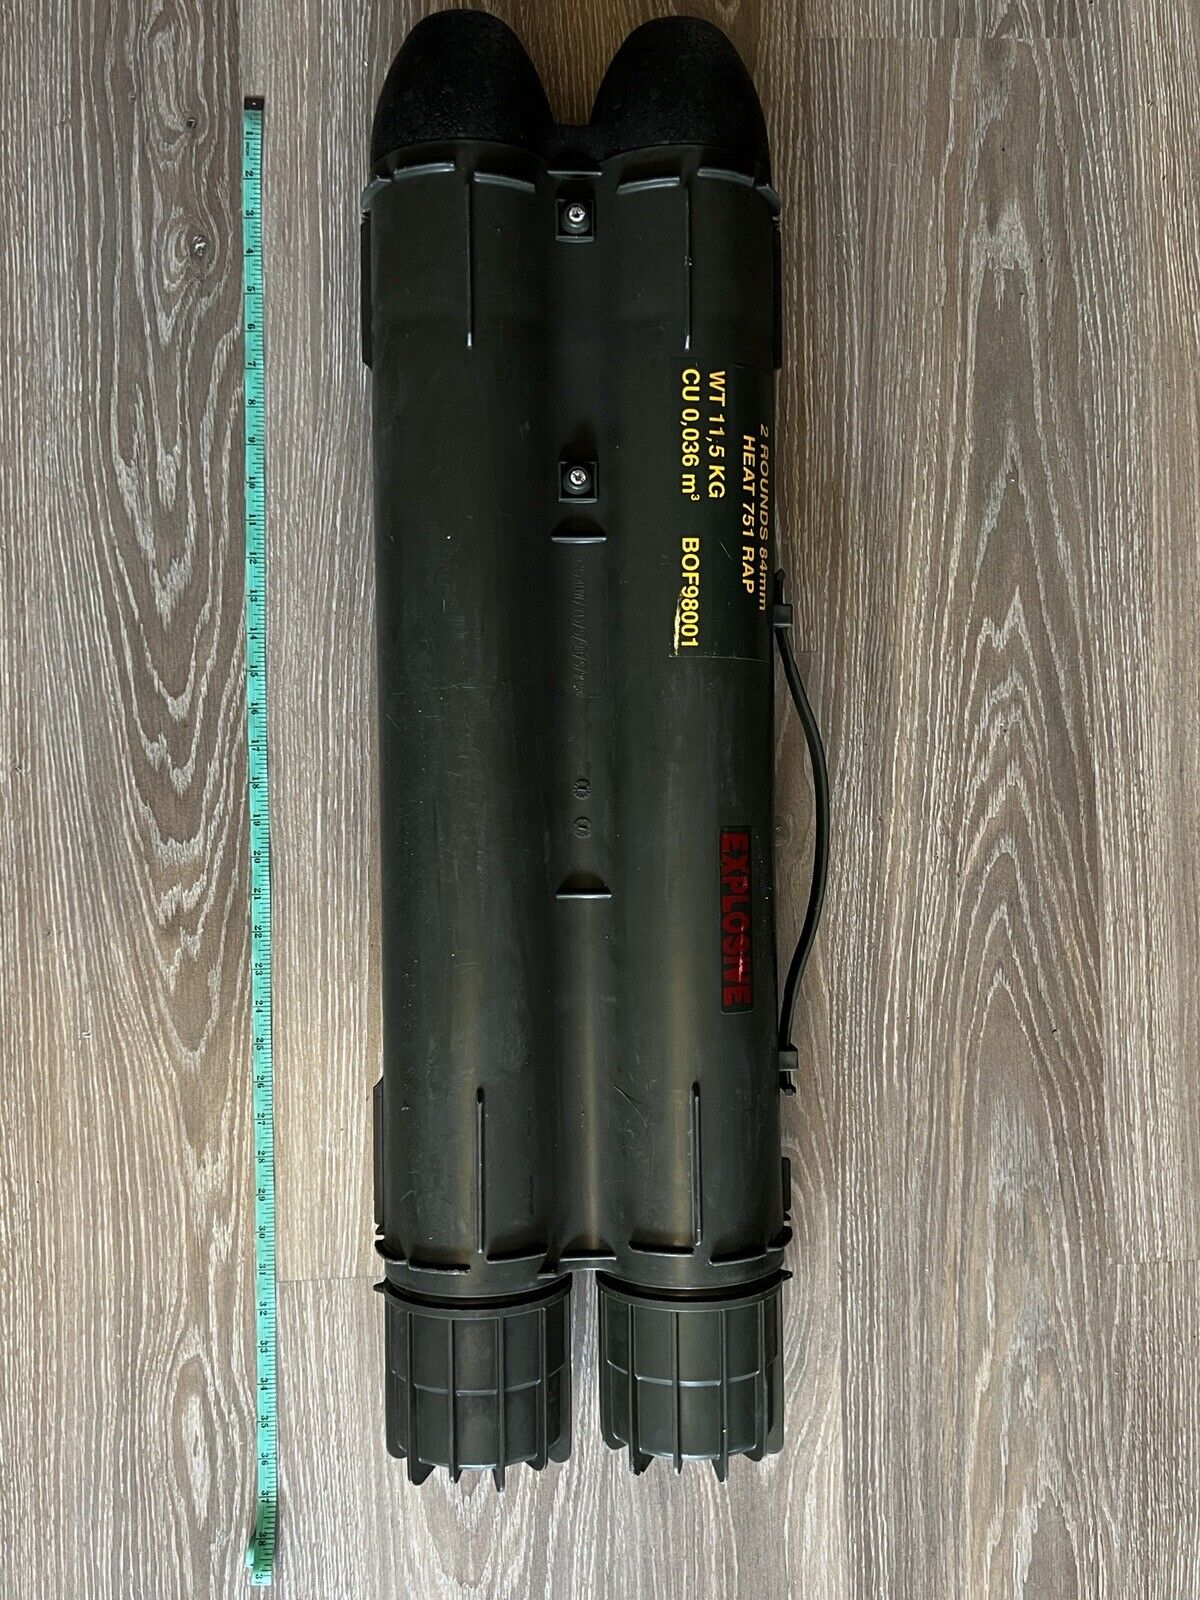 The Carl Gustaf 8.4 cm recoilless rifle Round Casing Container HEAT 751 SN/3